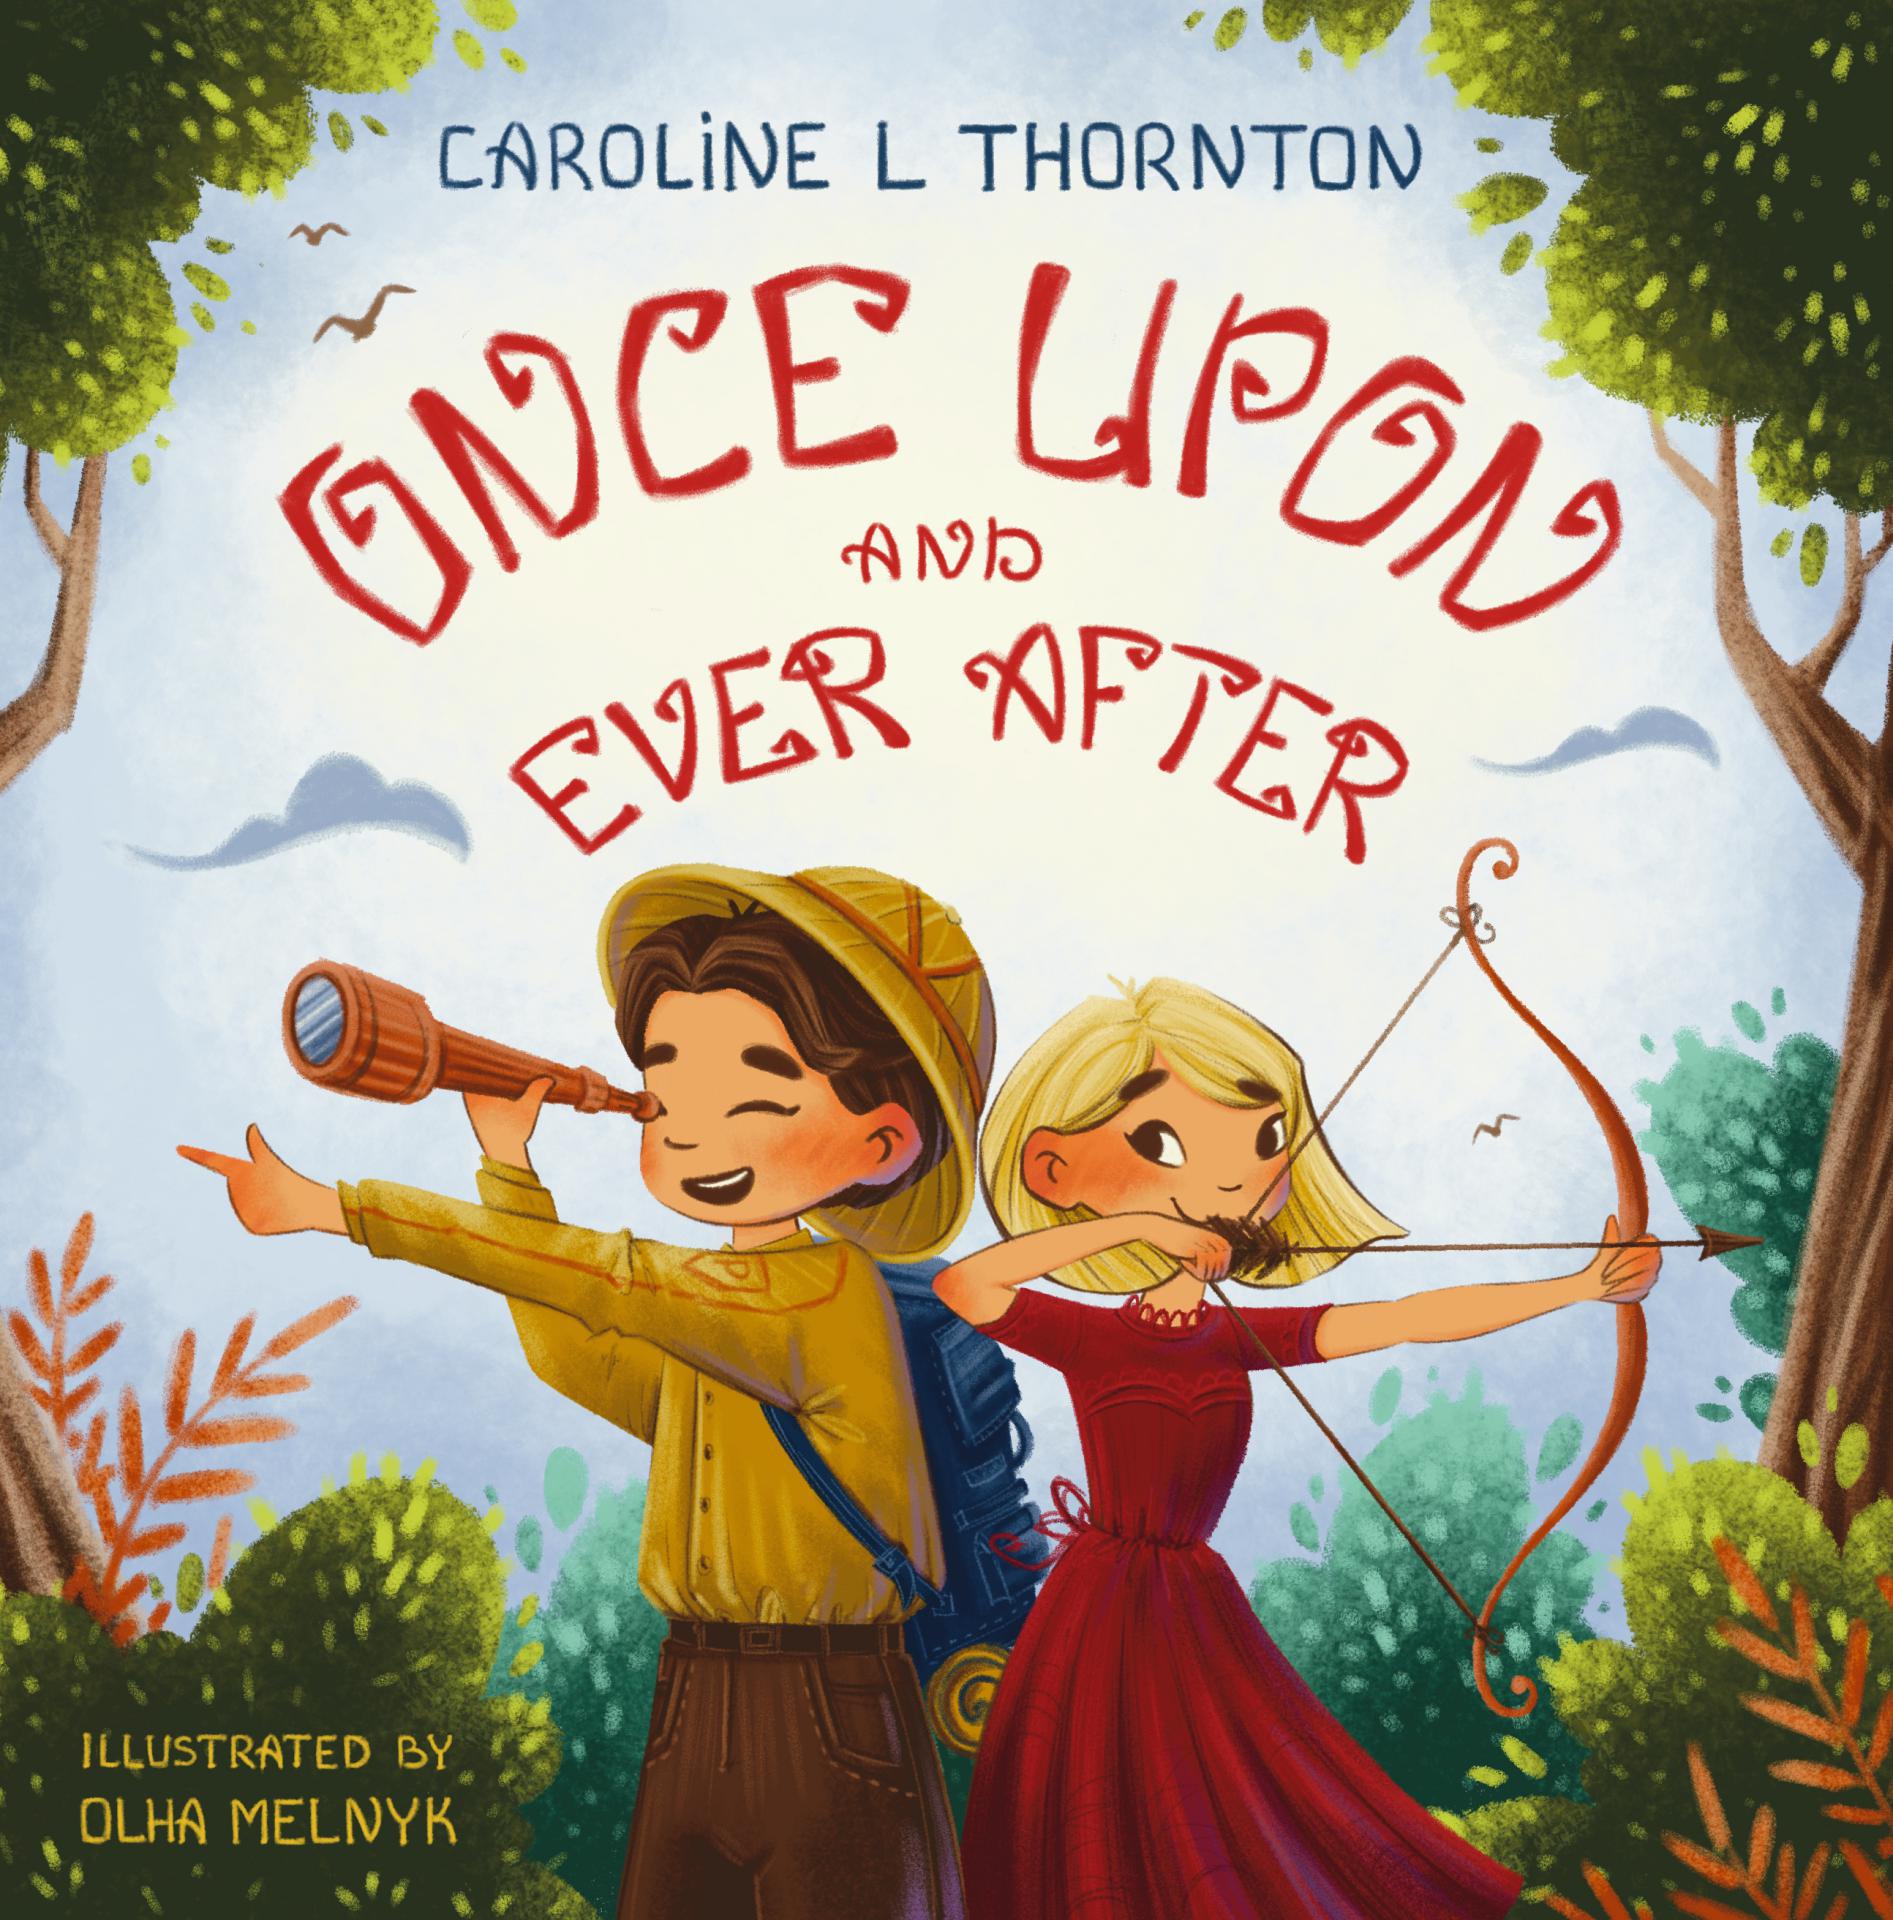 FREE: Once Upon and Ever After by Caroline L Thornton